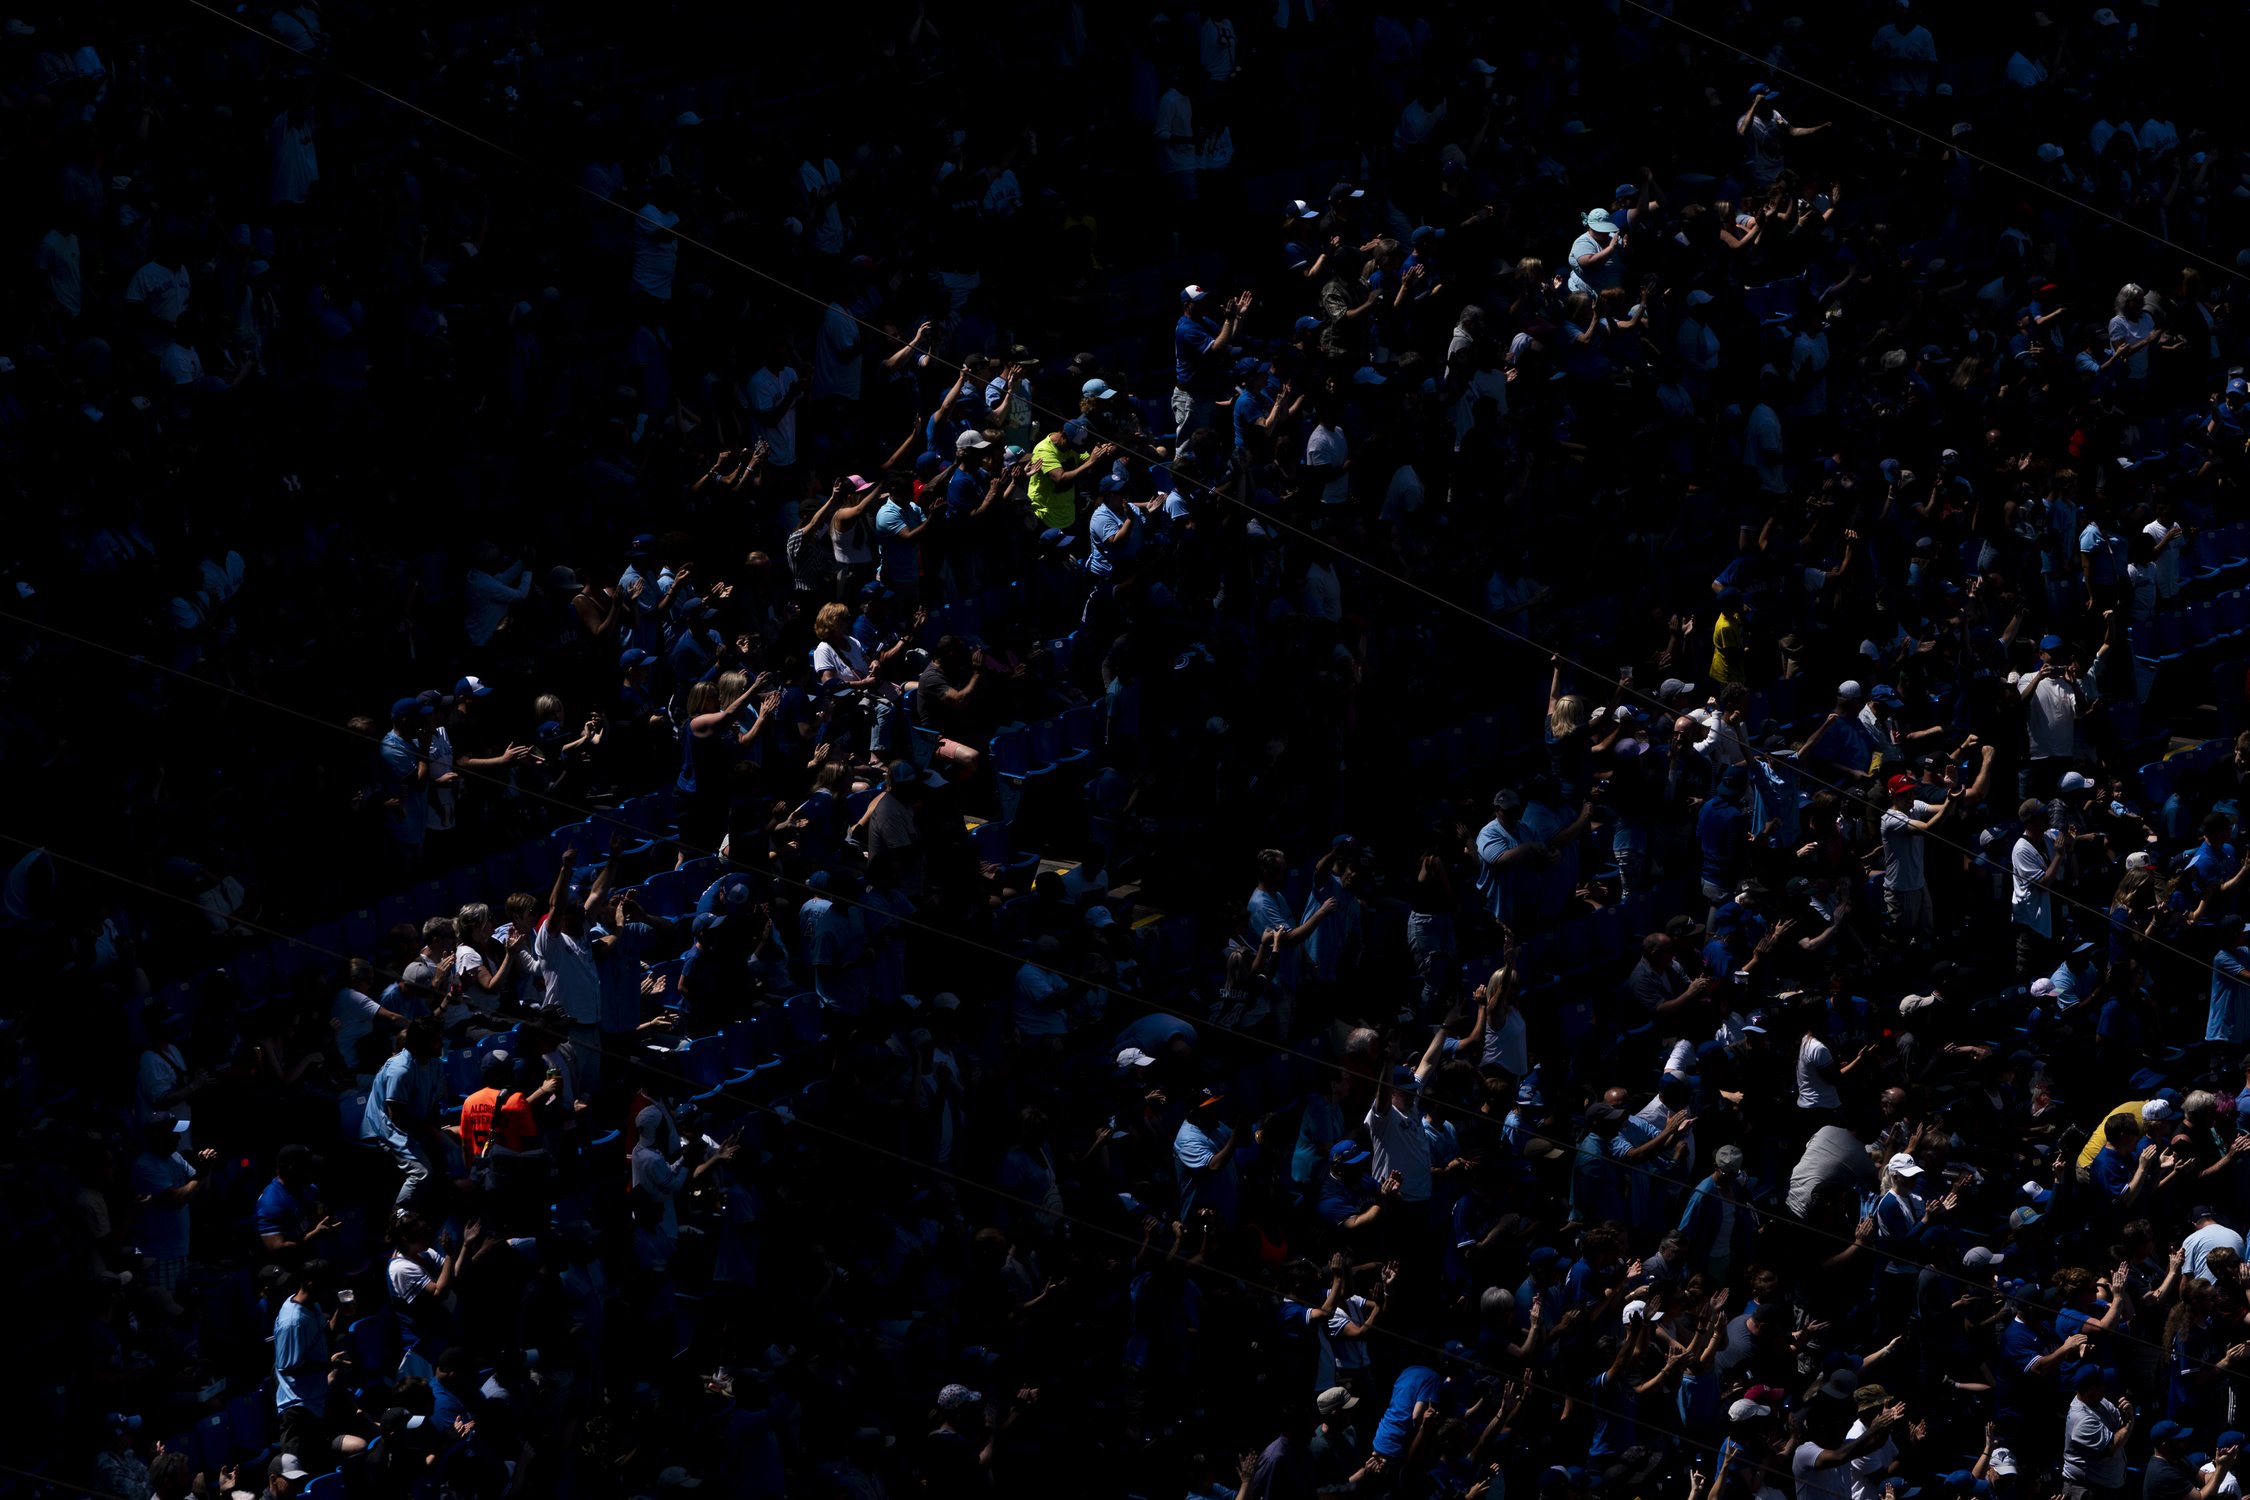  Toronto Blue Jays fans celebrate a two run home by Toronto Blue Jays designated hitter Vladimir Guerrero Jr. (27) (not seen) from a pitch by Cleveland Guardians starting pitcher Noah Syndergaard (34) during first inning American League MLB baseball 